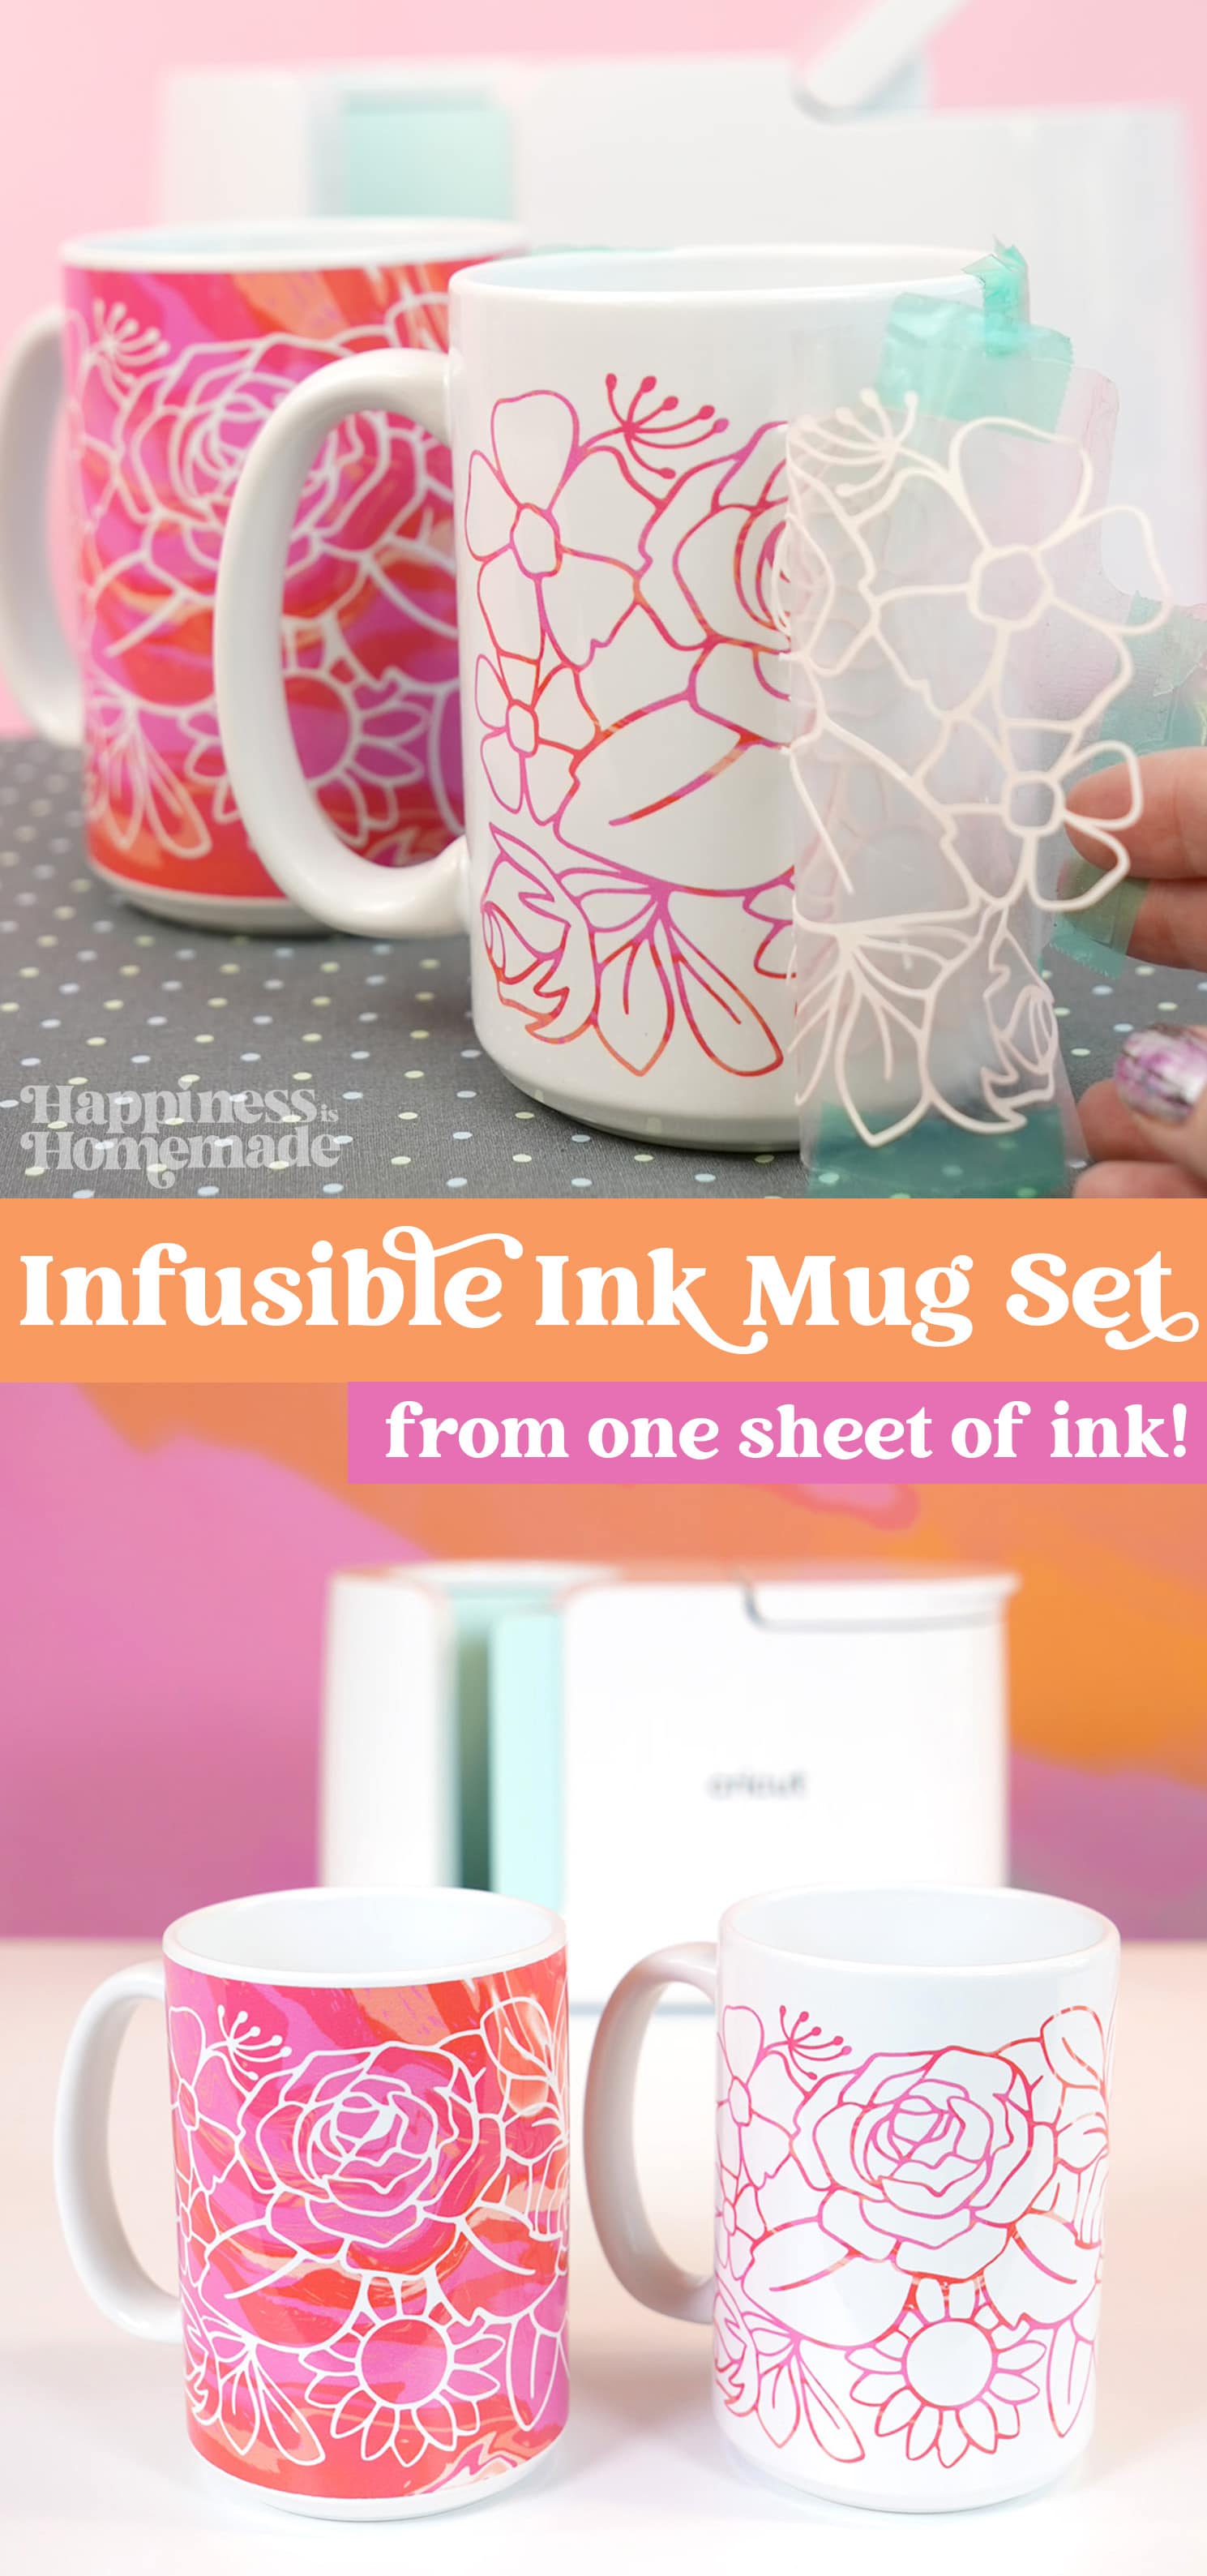 infusible ink mug set from one sheet of ink!